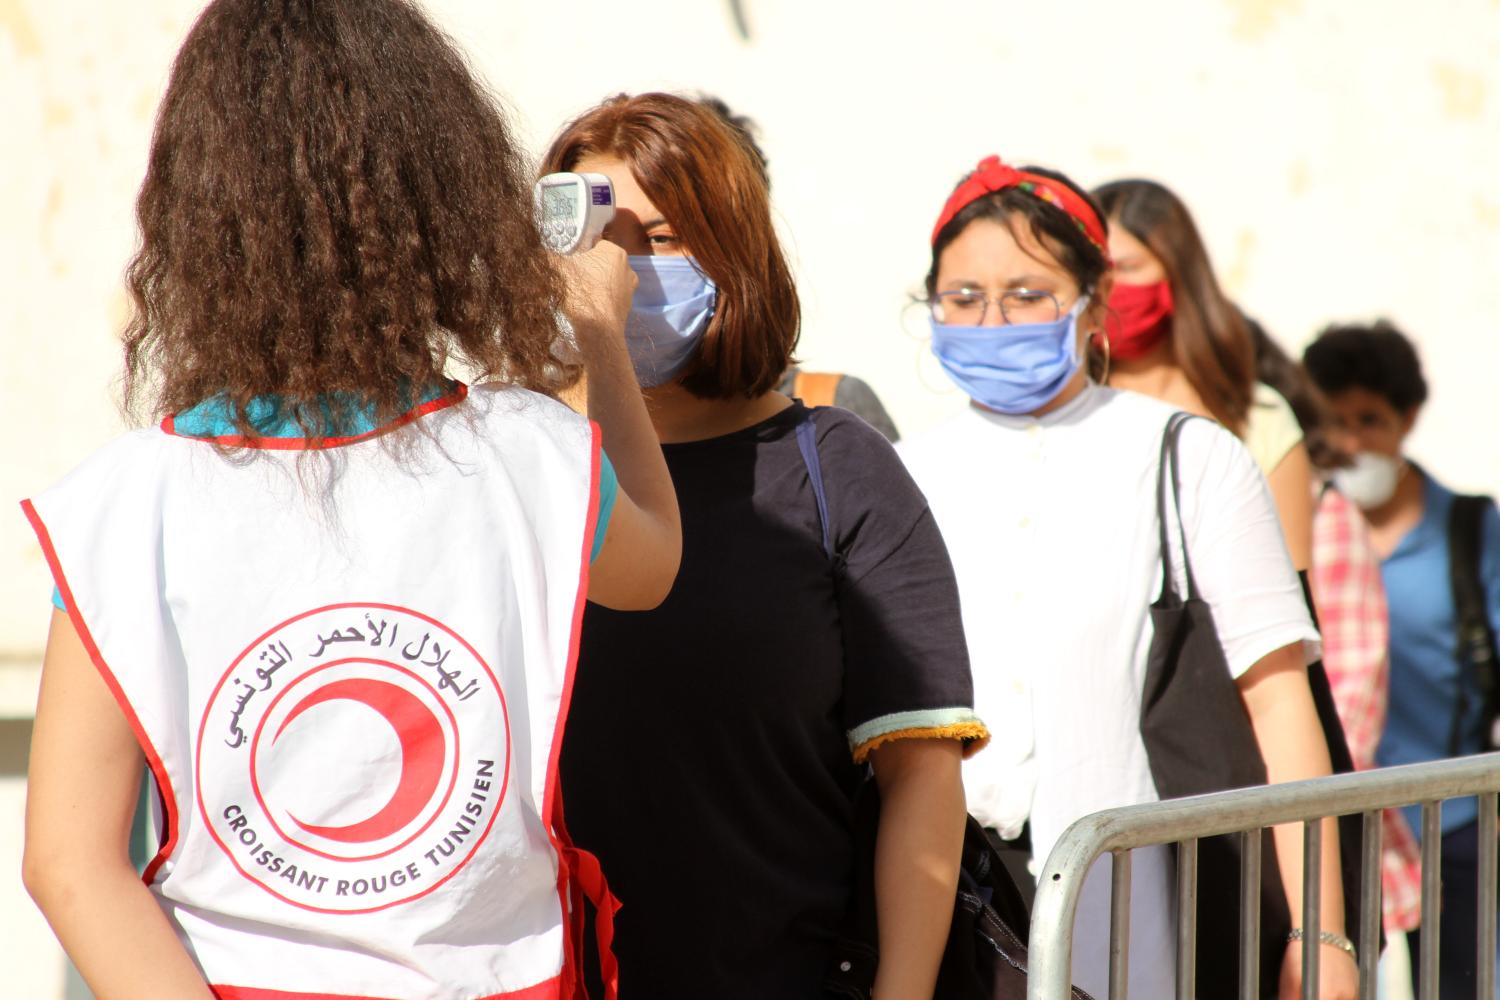 TUNIS, TUNISIA - MAY 28: Tunisian high school final year students wearing face mask return to schools after two months of break due to the novel coronavirus (Covid-19) pandemic restrictions in Tunis, Tunisia on May 28, 2020.